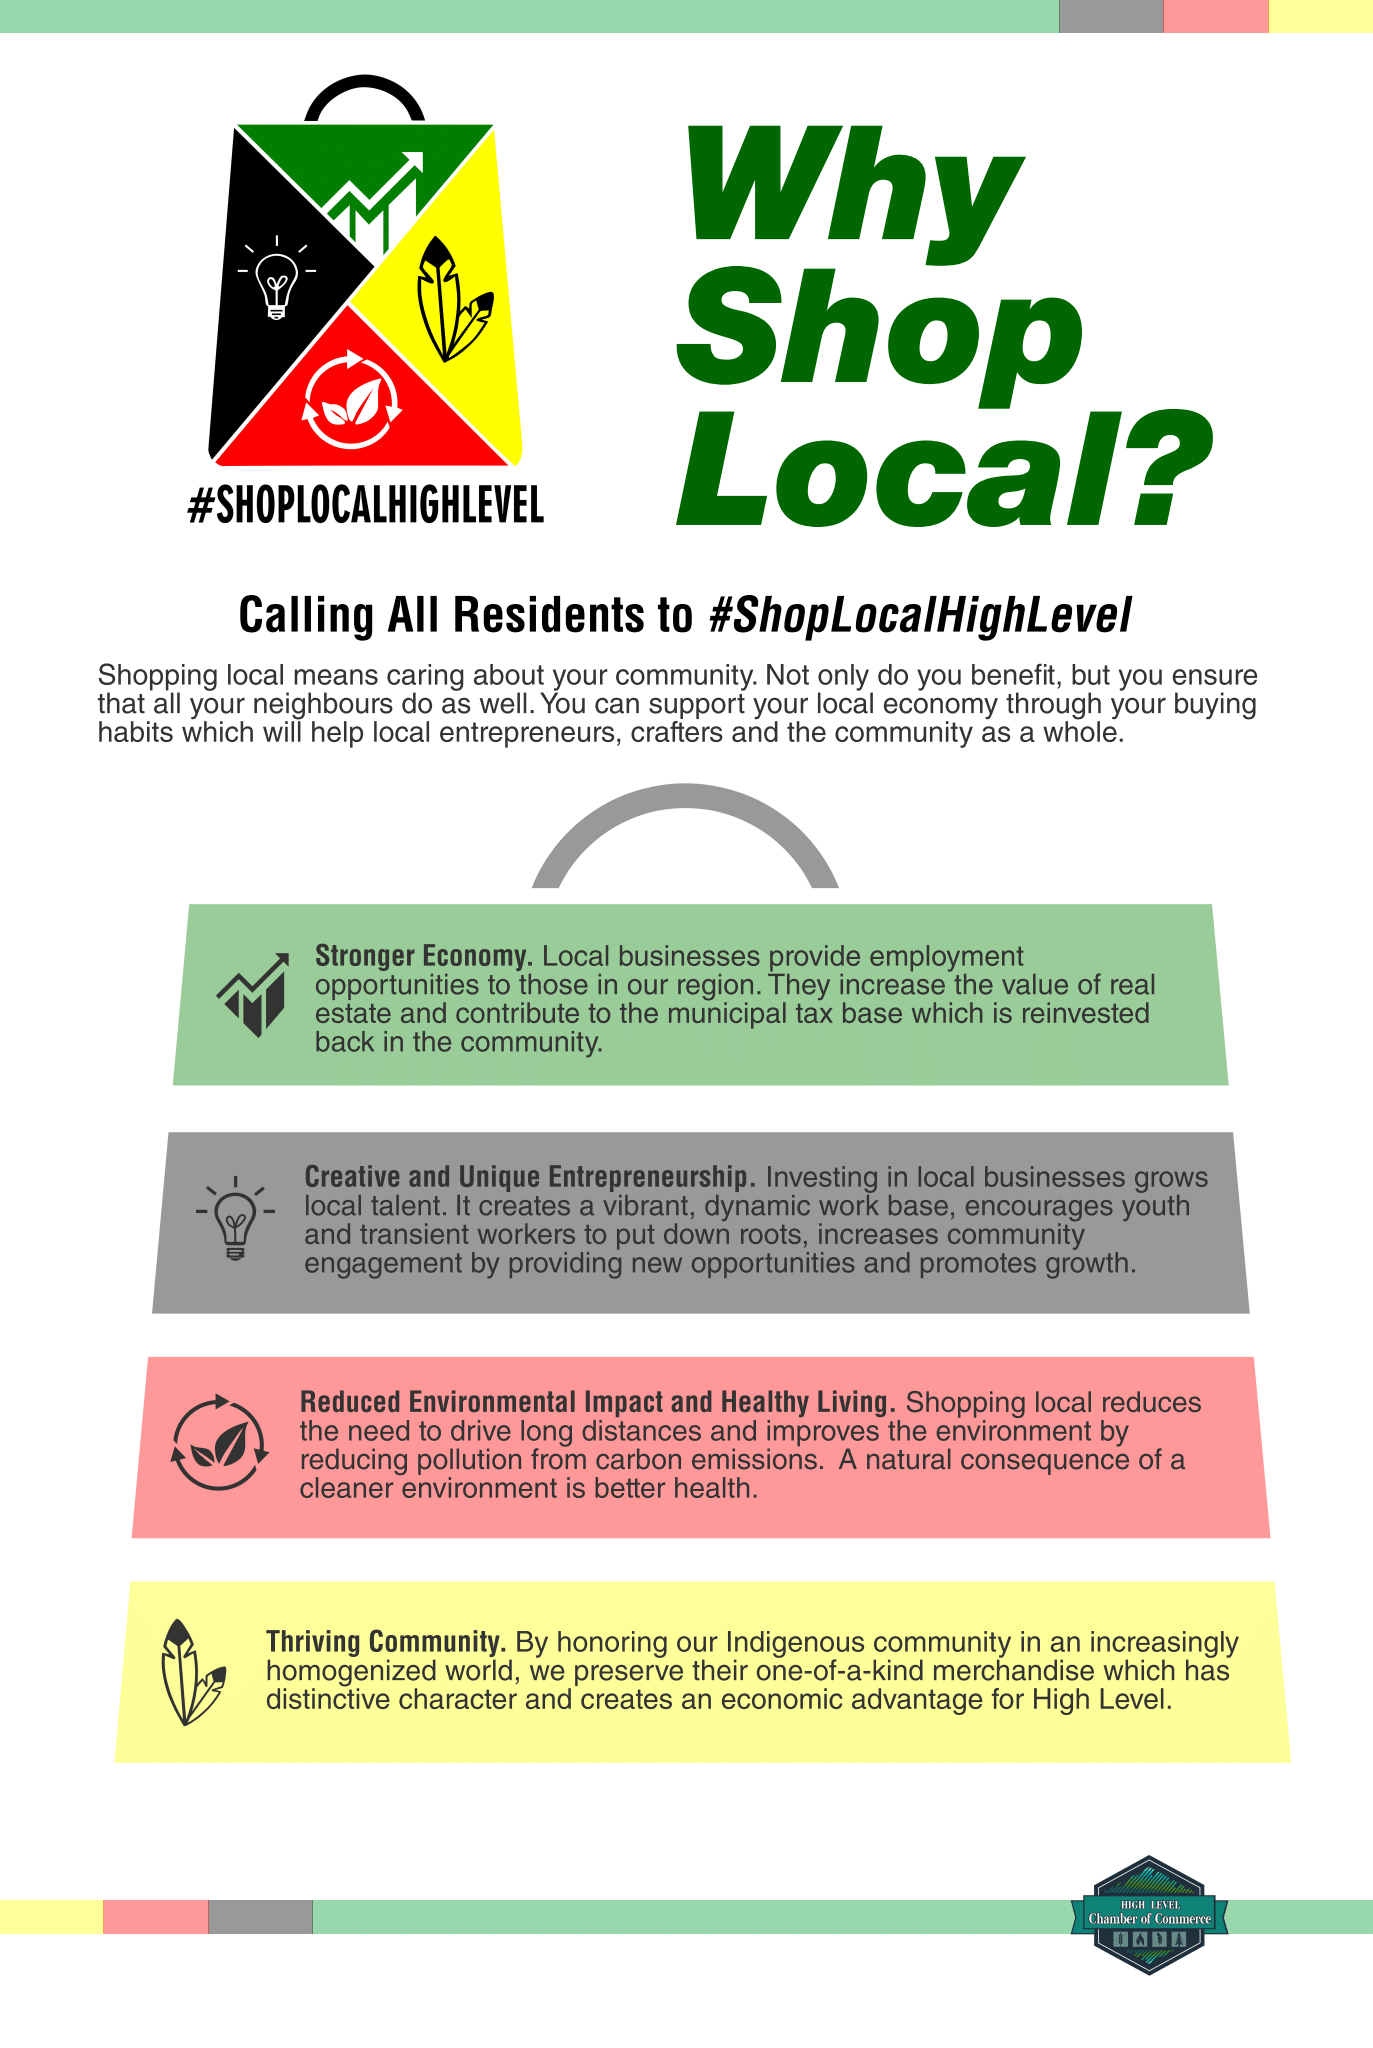 Why shop local? Calling all residents to #ShopLocalHighLevel